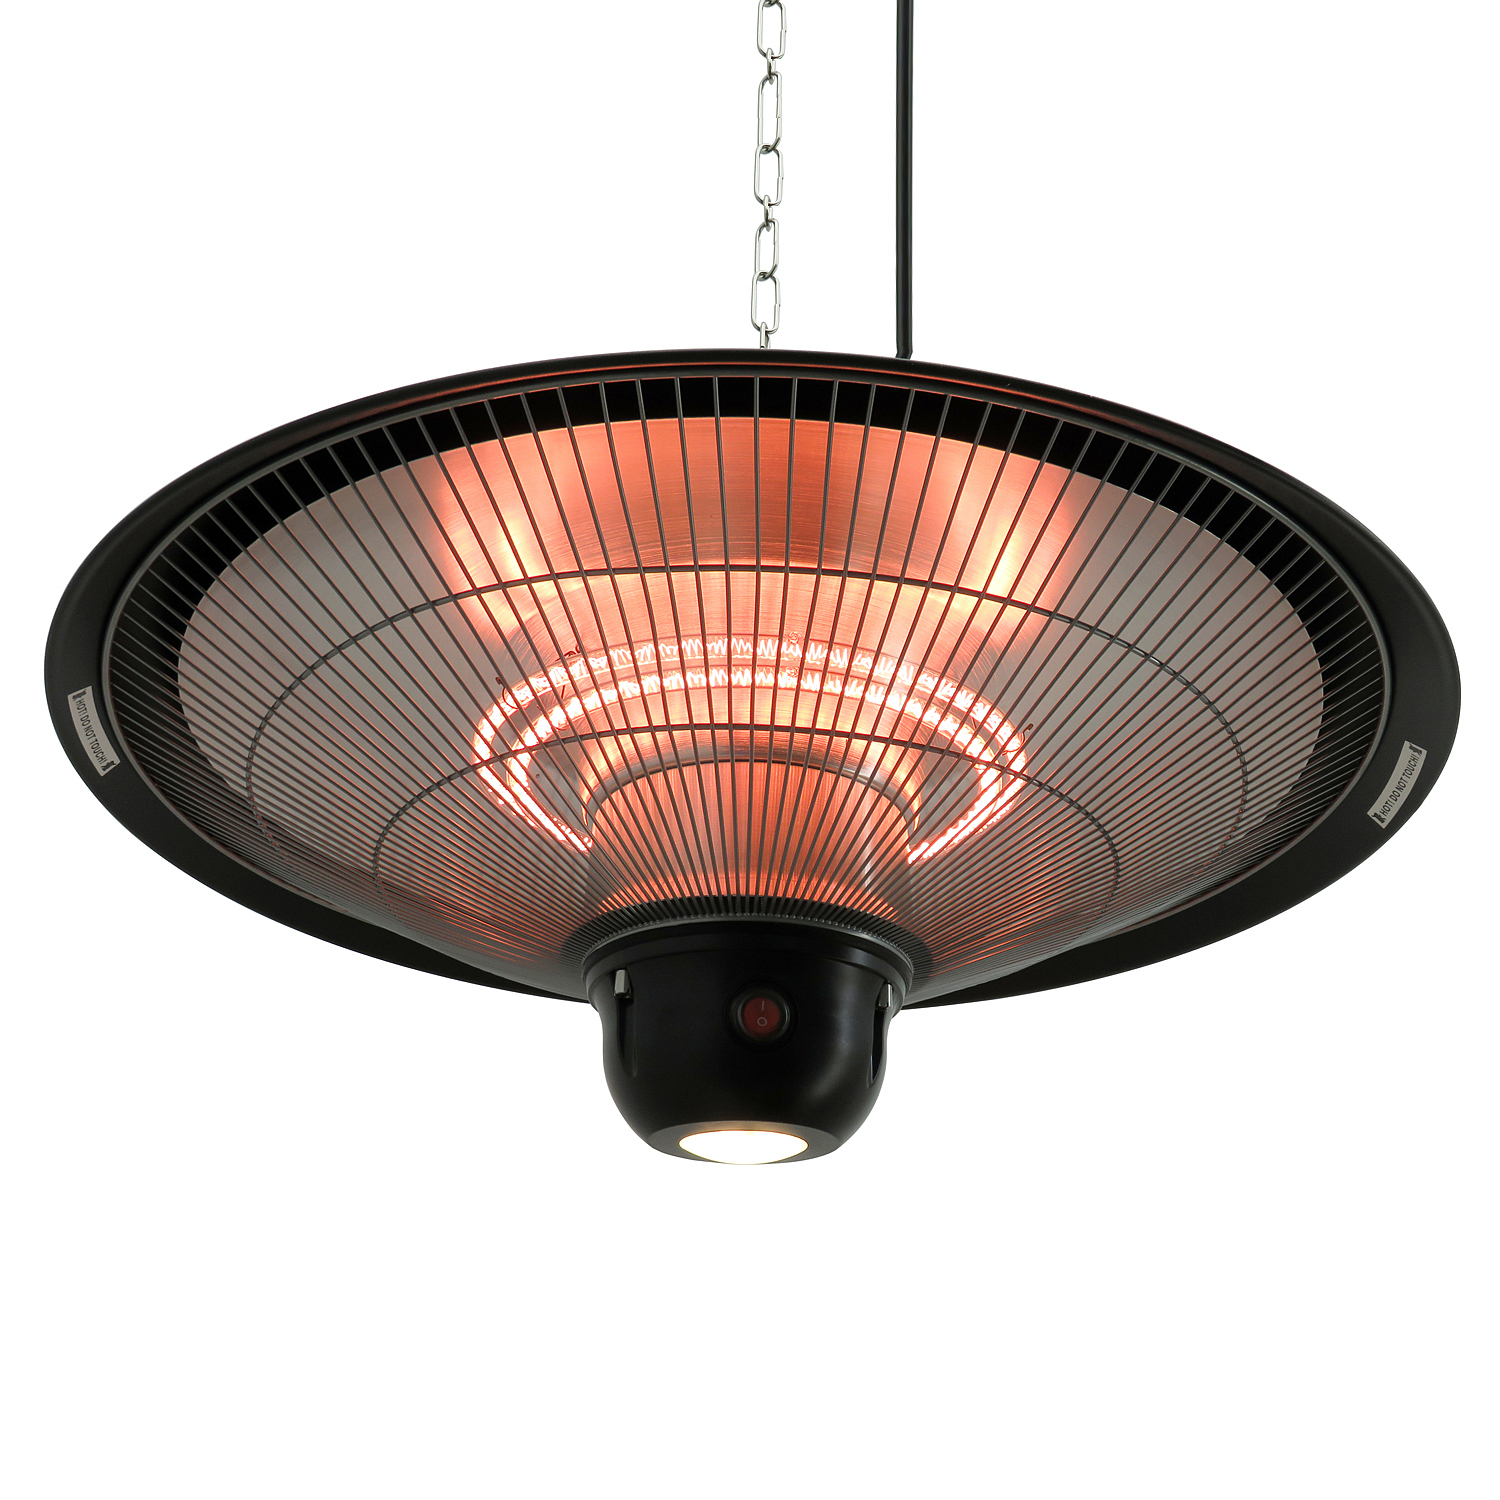 Electric Patio Heater Ceiling Style 842-065